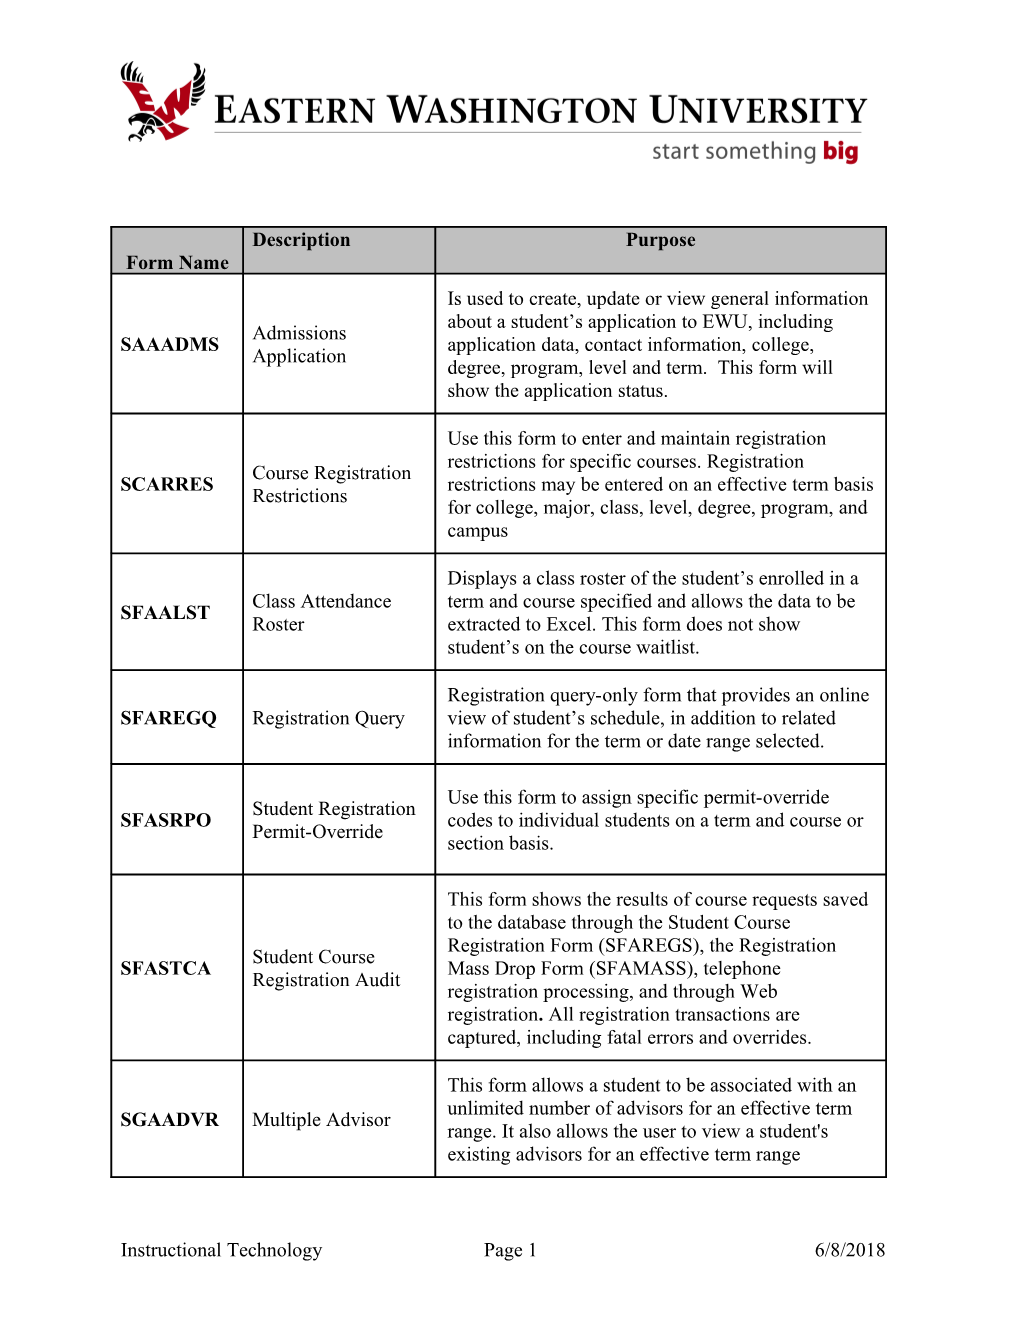 Instructional Technology Page 1 10/17/2007